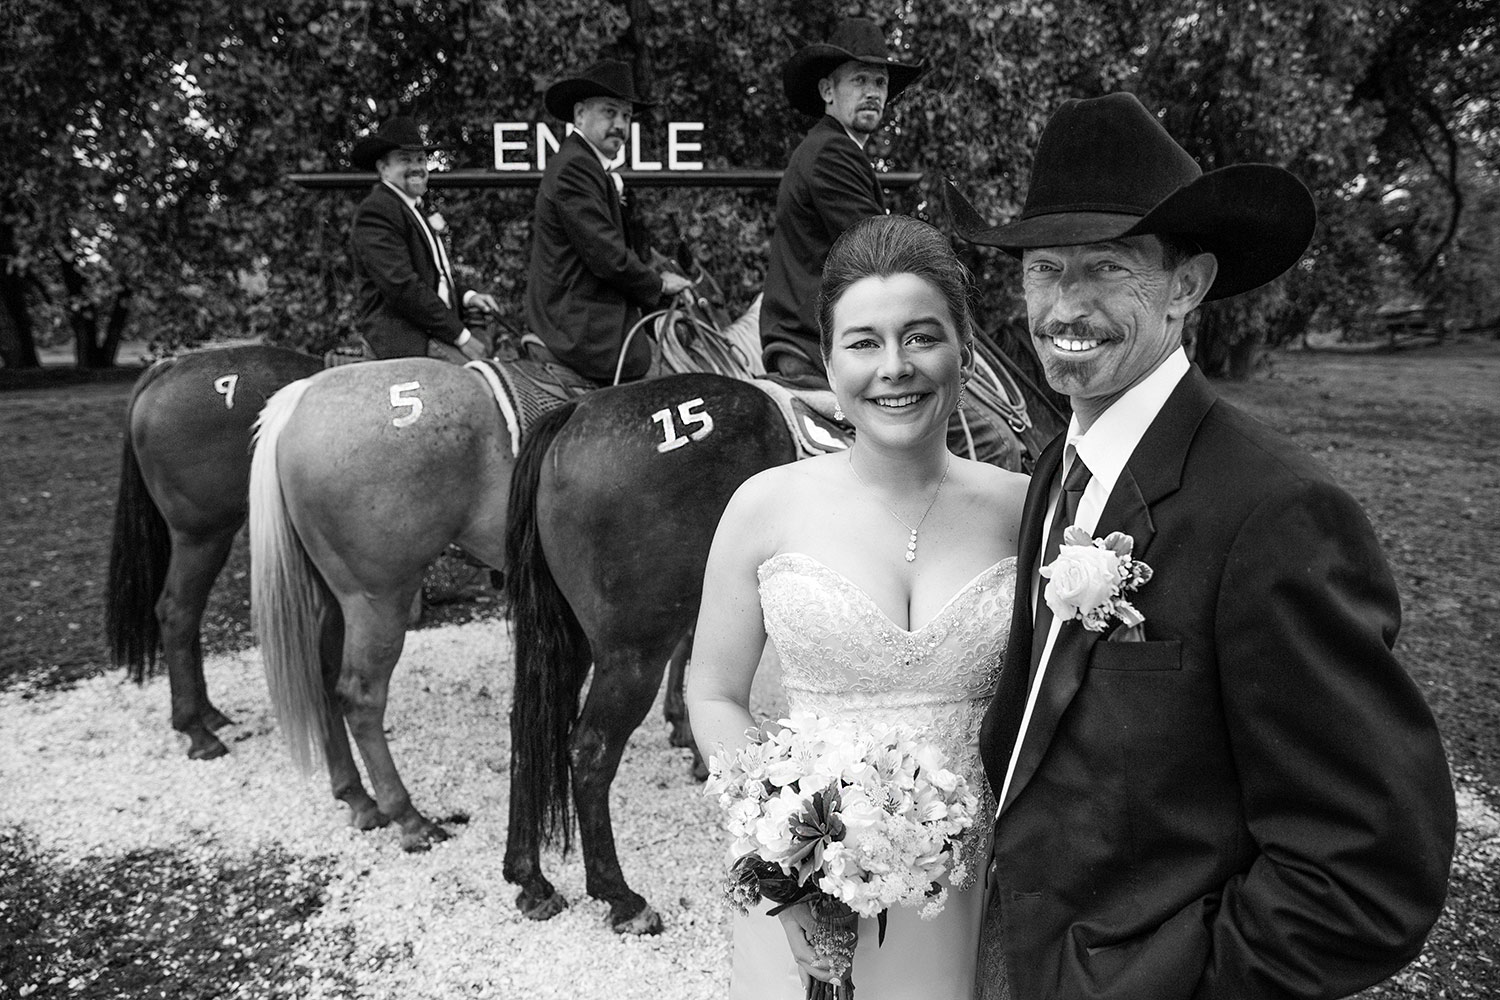 The bride and groom pose for a photograph in front of the groomsmen on horseback, who have the date of the wedding 'branded' on their horses near Chinook, Montana.